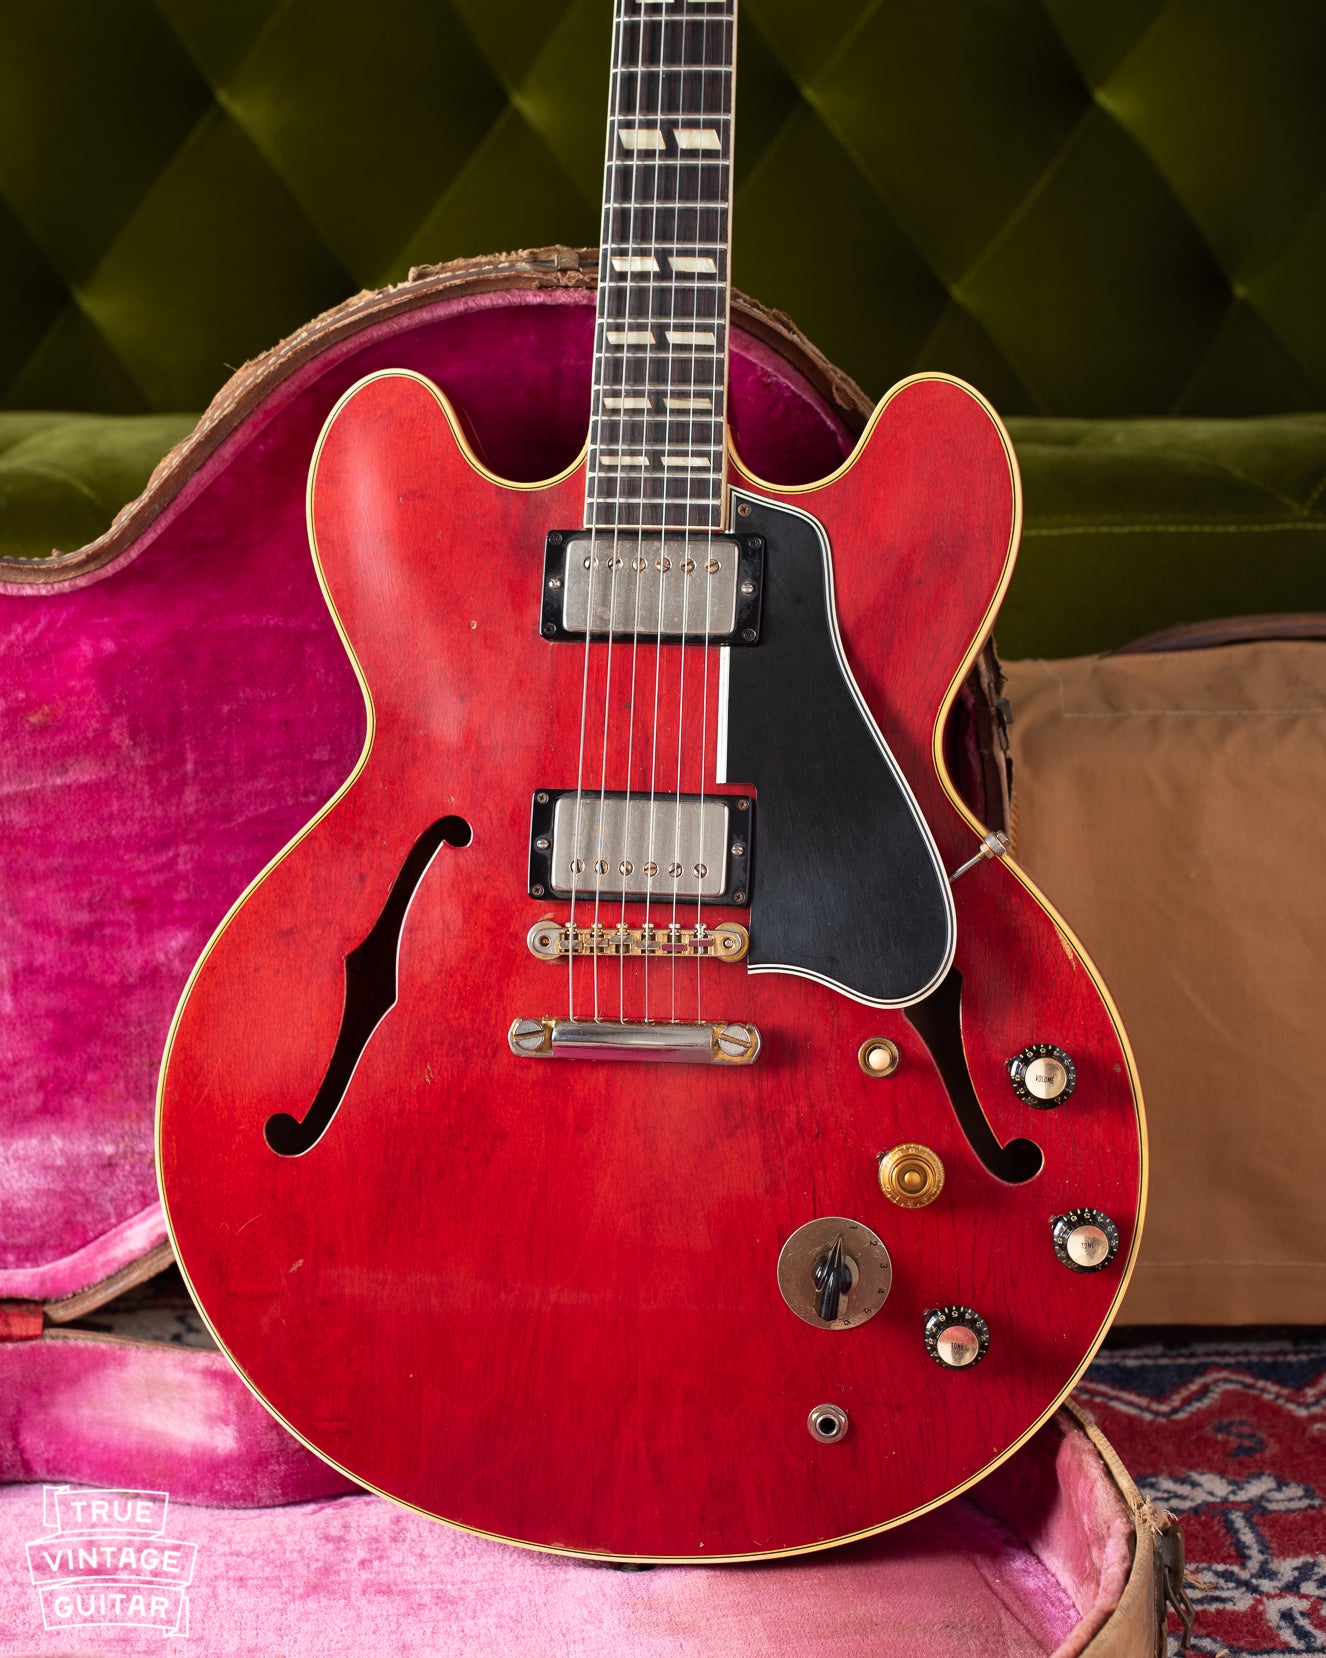 Gibson ES-345 1960 Guitar Cherry Red, Stop tail, Long guard, vintage guitar in original case